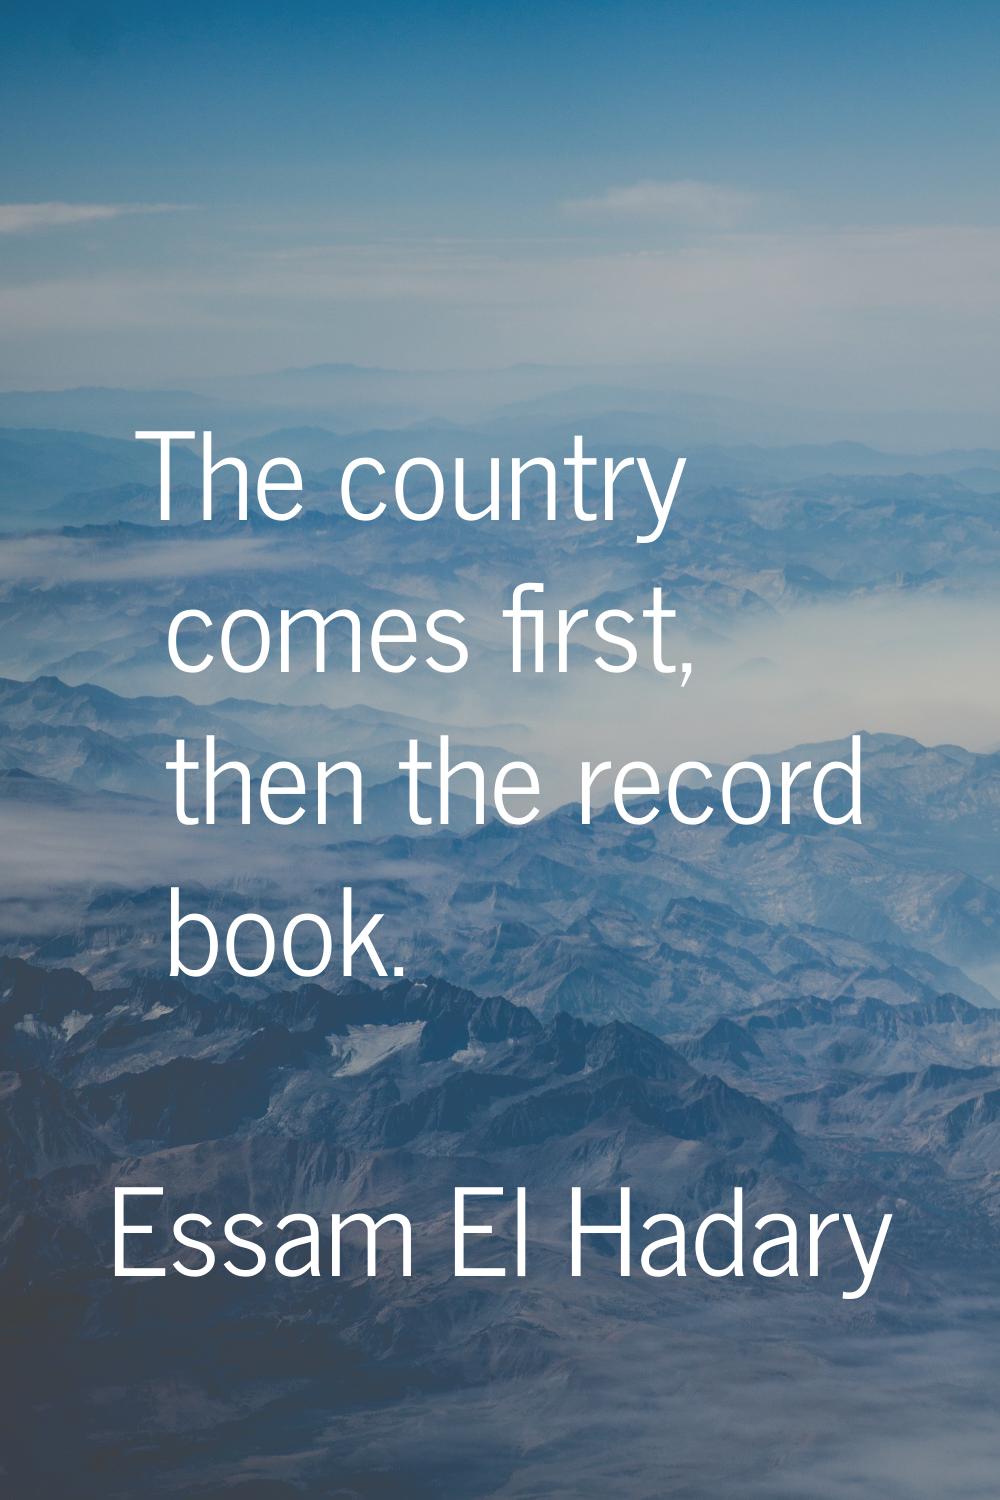 The country comes first, then the record book.